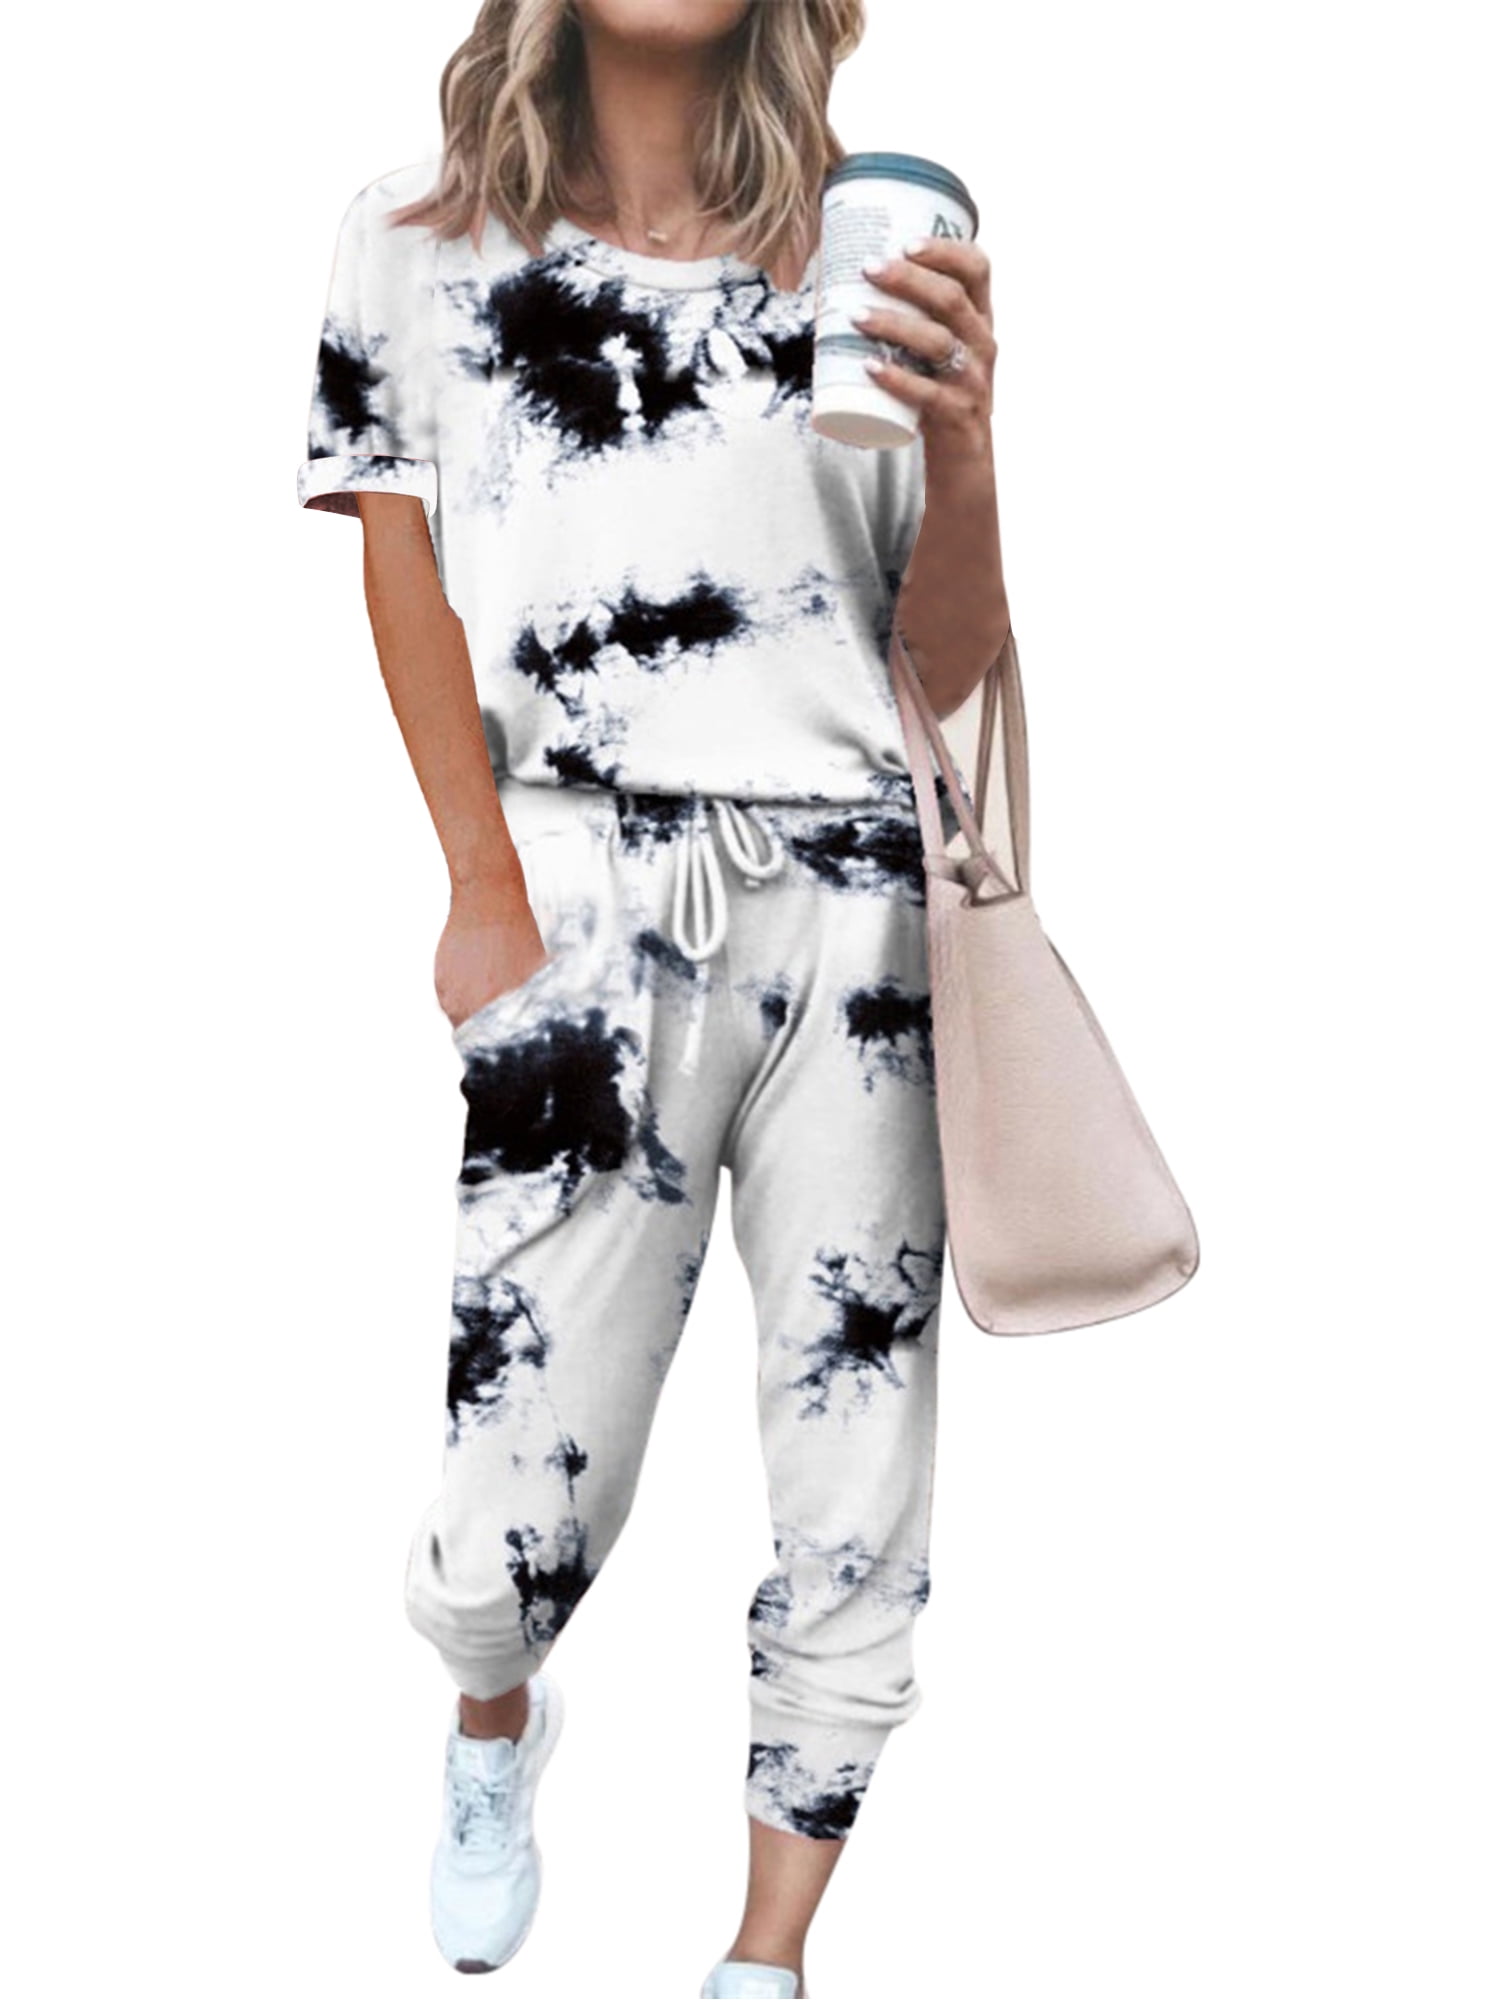 Details about   2PC Women Casual Home Sleepwear Tie-dye Long Sleeves Tops Trouser Pant Tracksuit